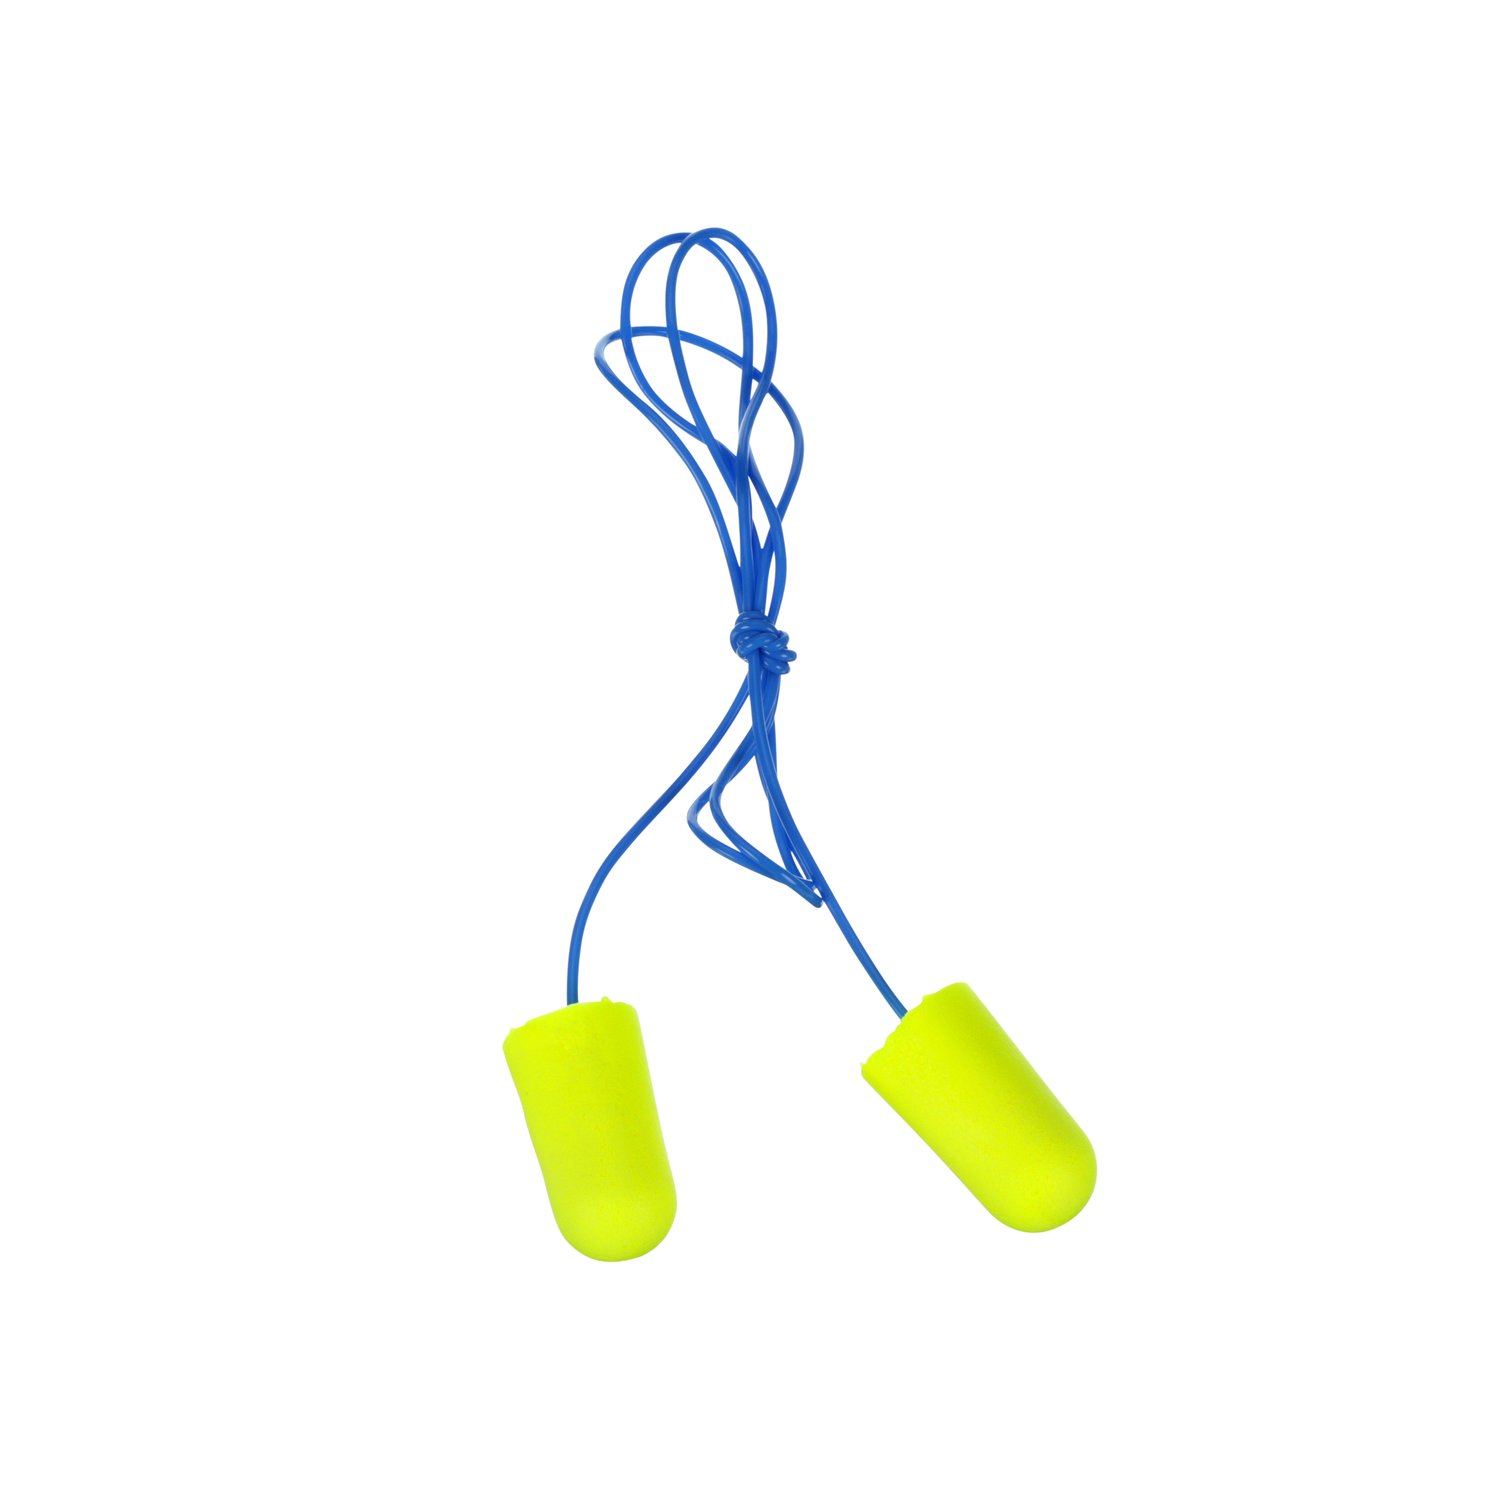 7100006342 - 3M E-A-Rsoft Yellow Neons Earplugs 311-1251, Corded, Poly Bag, Large
Size, 2000 Pair/Case